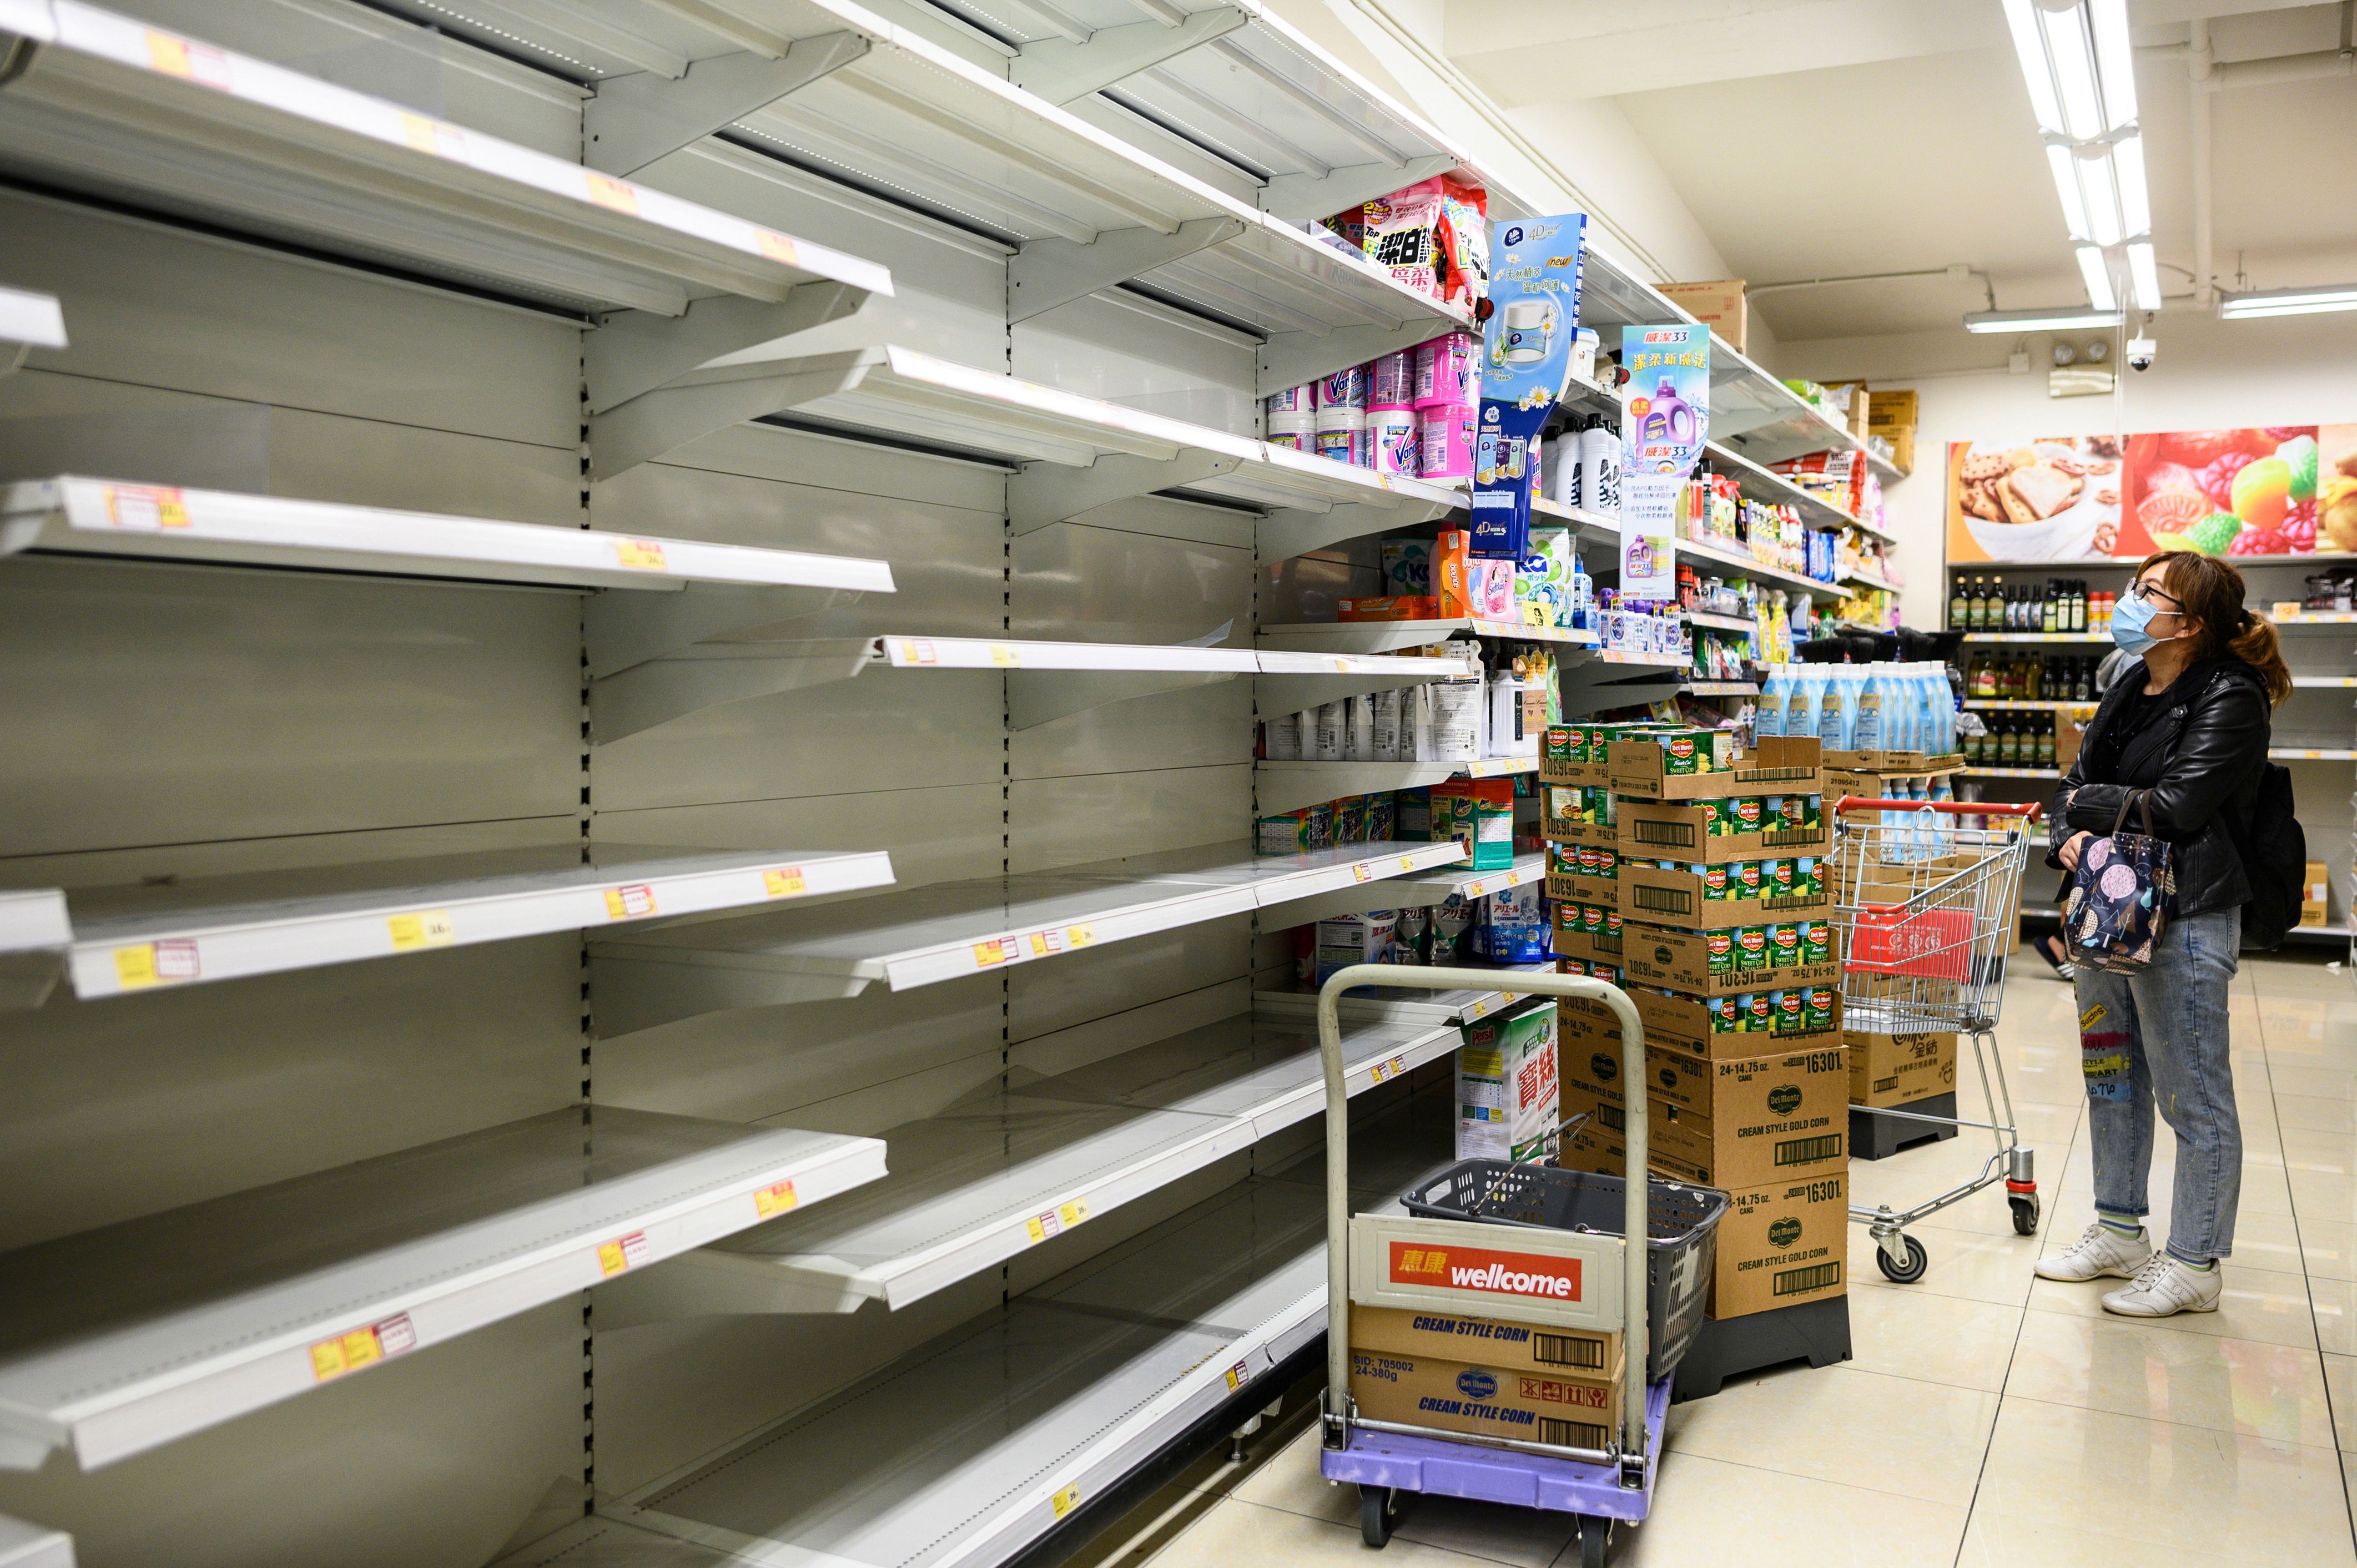 A woman looks at empty supermarket shelves, usually used for stacking paper towels, in Hong Kong on February 5, 2020.